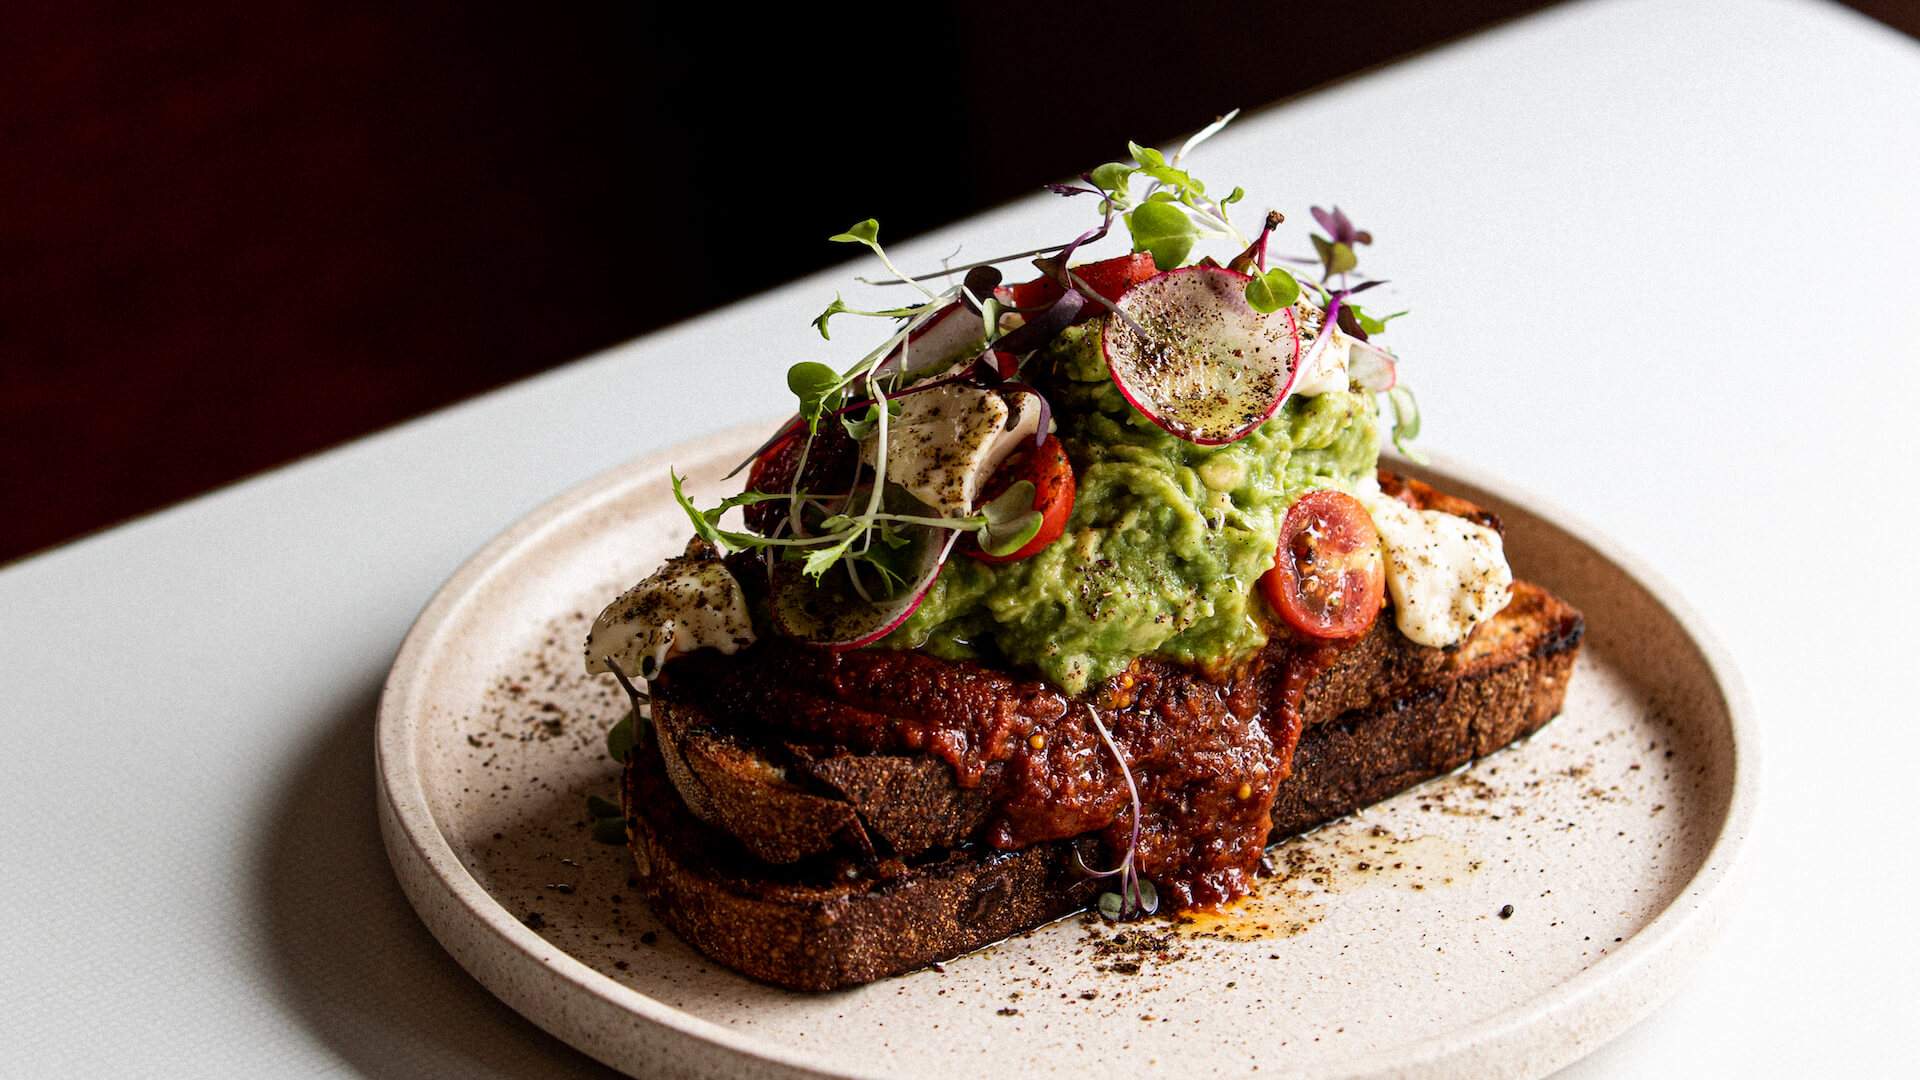 avocado on toast from Terror Twilight - one of the best cafes in Melbourne